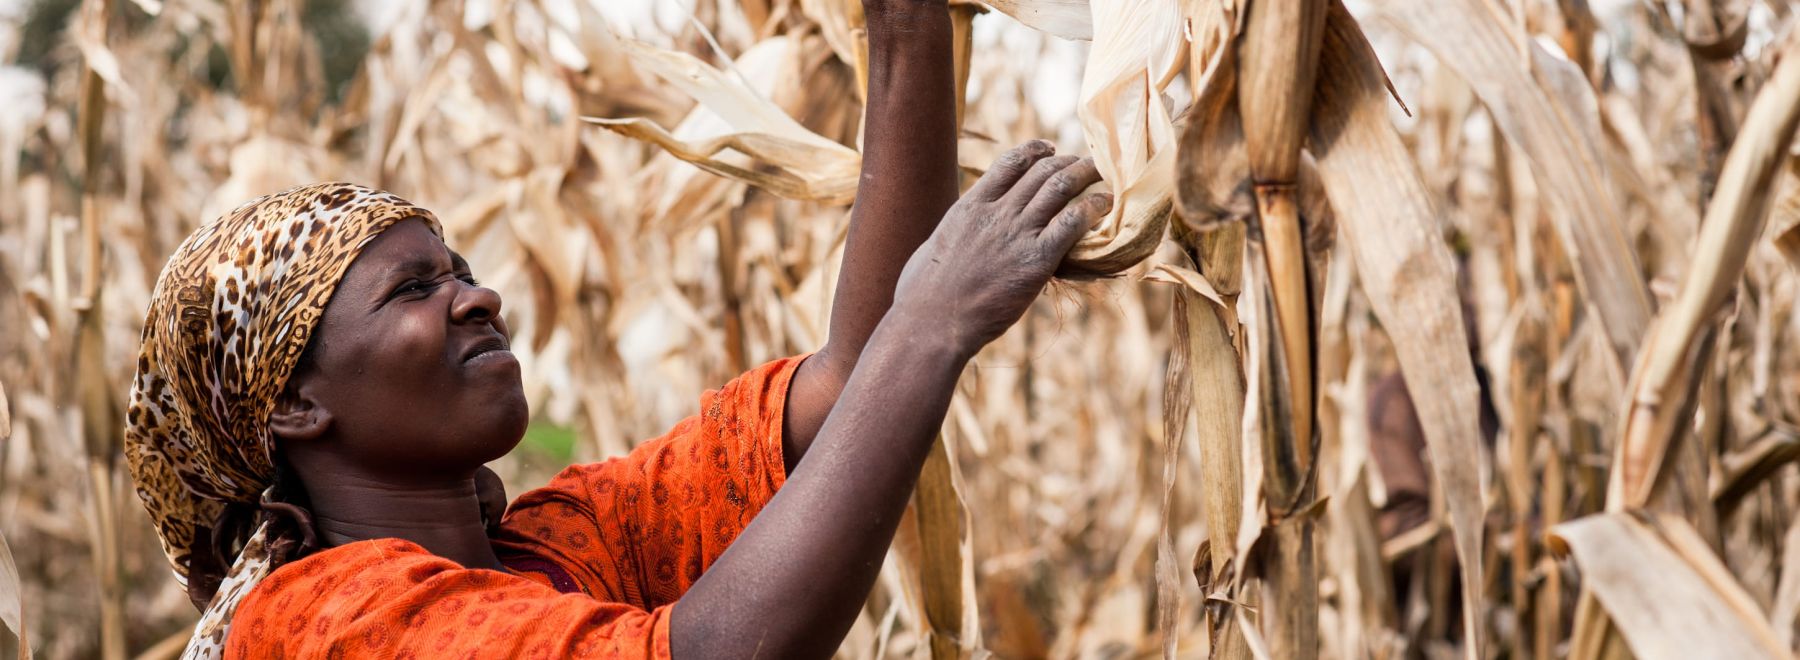 A farmer in Tanzania harvests her maize